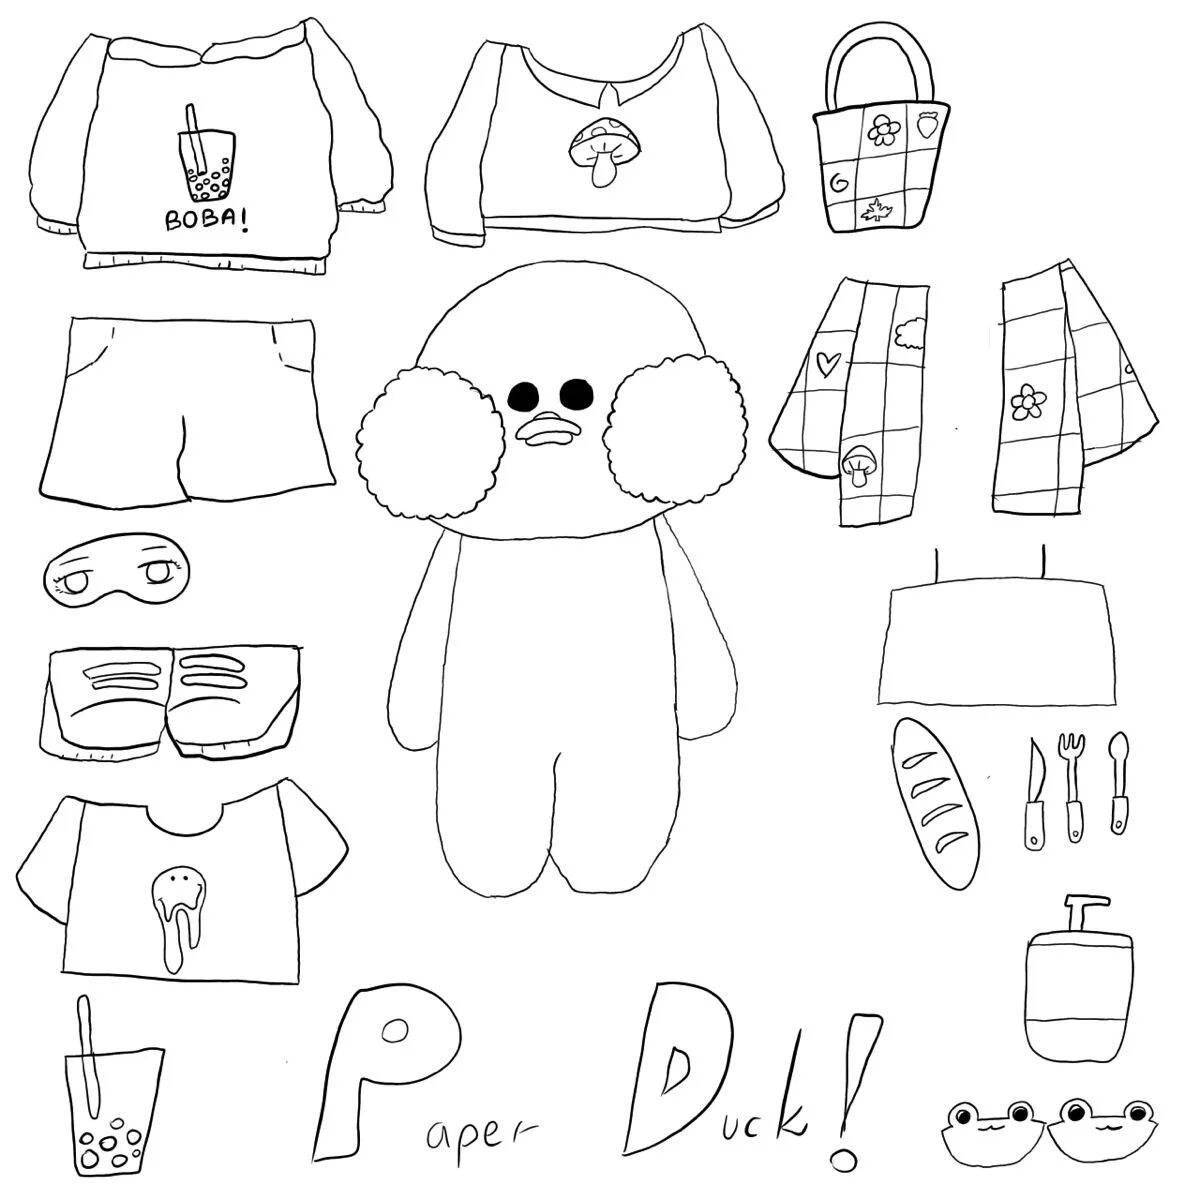 Coloring page for ooty lalafanfan funky clothes